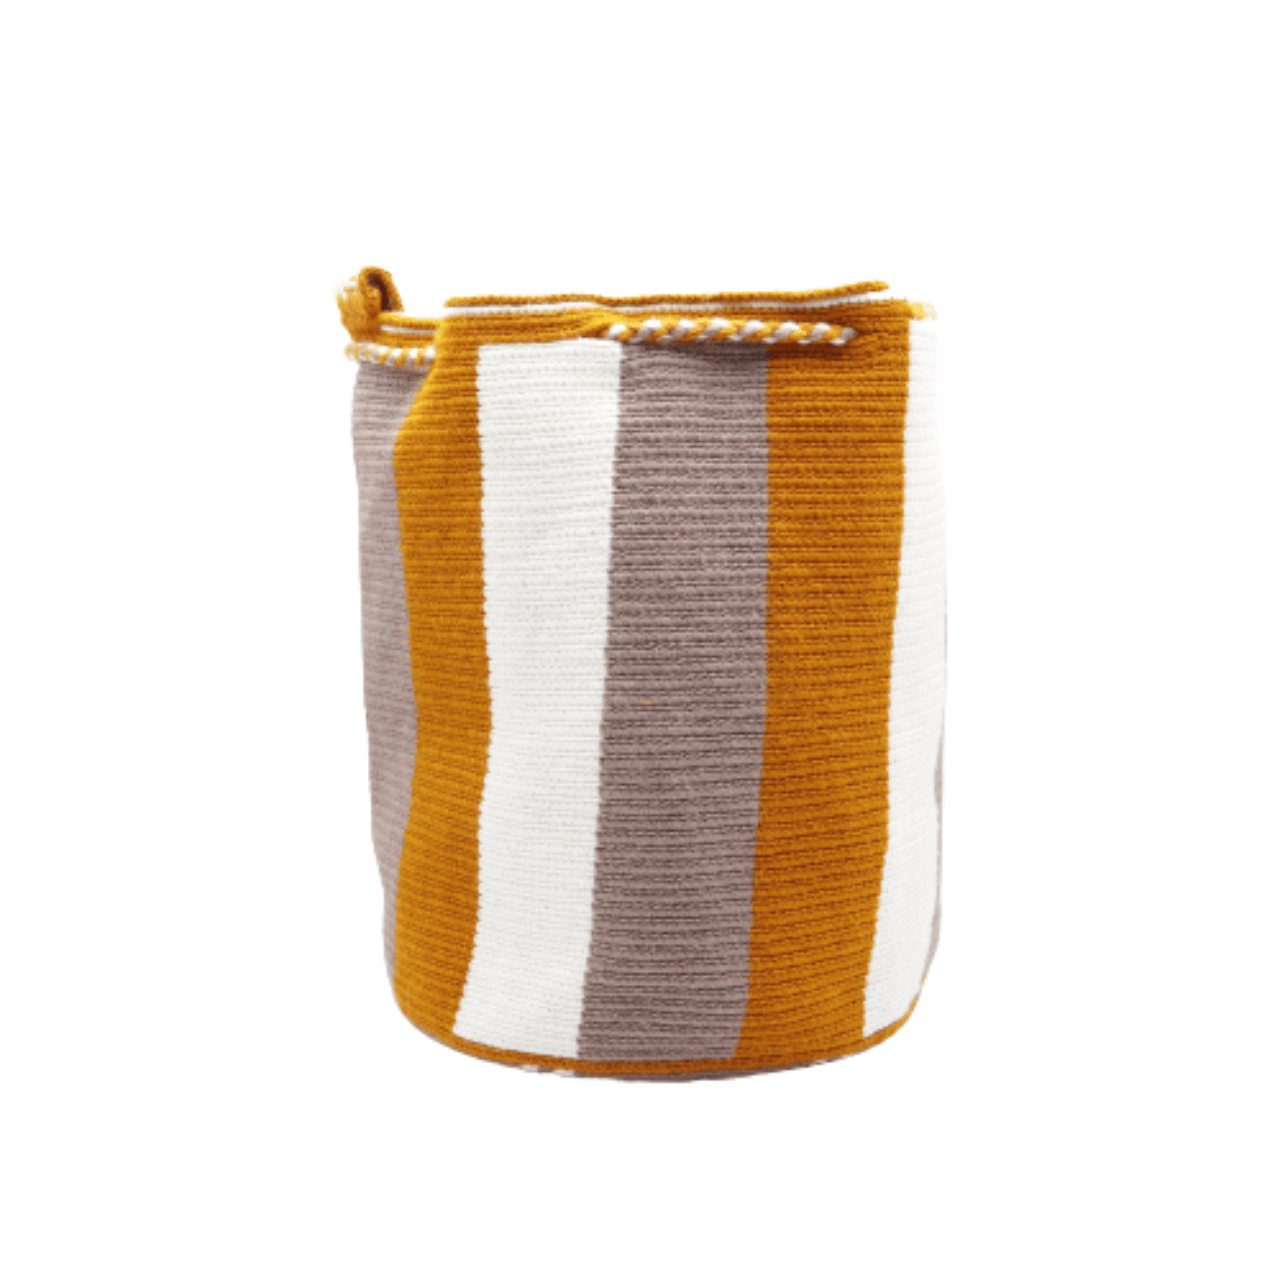 Winifred Wayuu Bag - Beige, Rust, and Taupe Colors - Wide Vertical Straps - Handcrafted Beauty and Chic Style